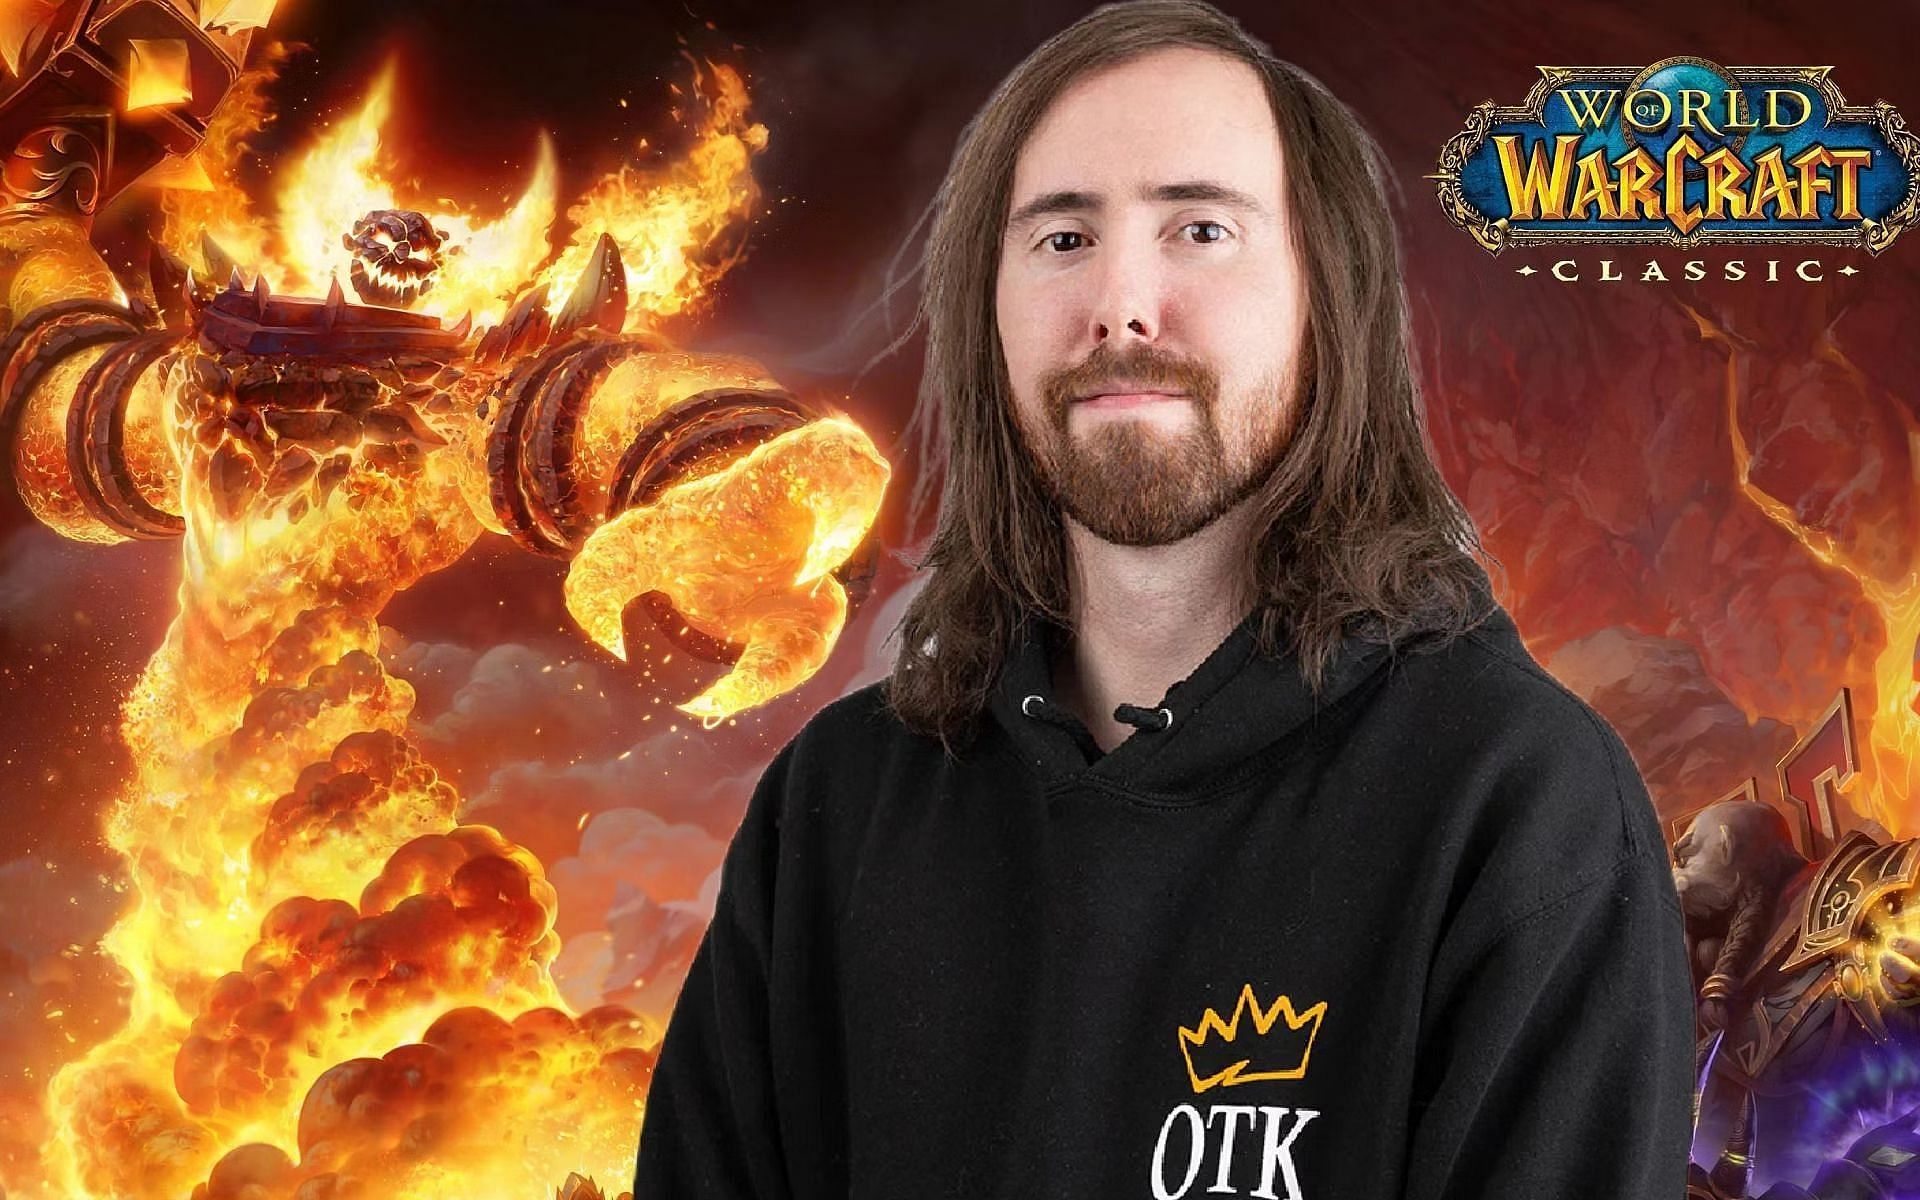 "I was right, they were wrong" - Asmongold explains why he got banned from World of Warcraft - Sportskeeda